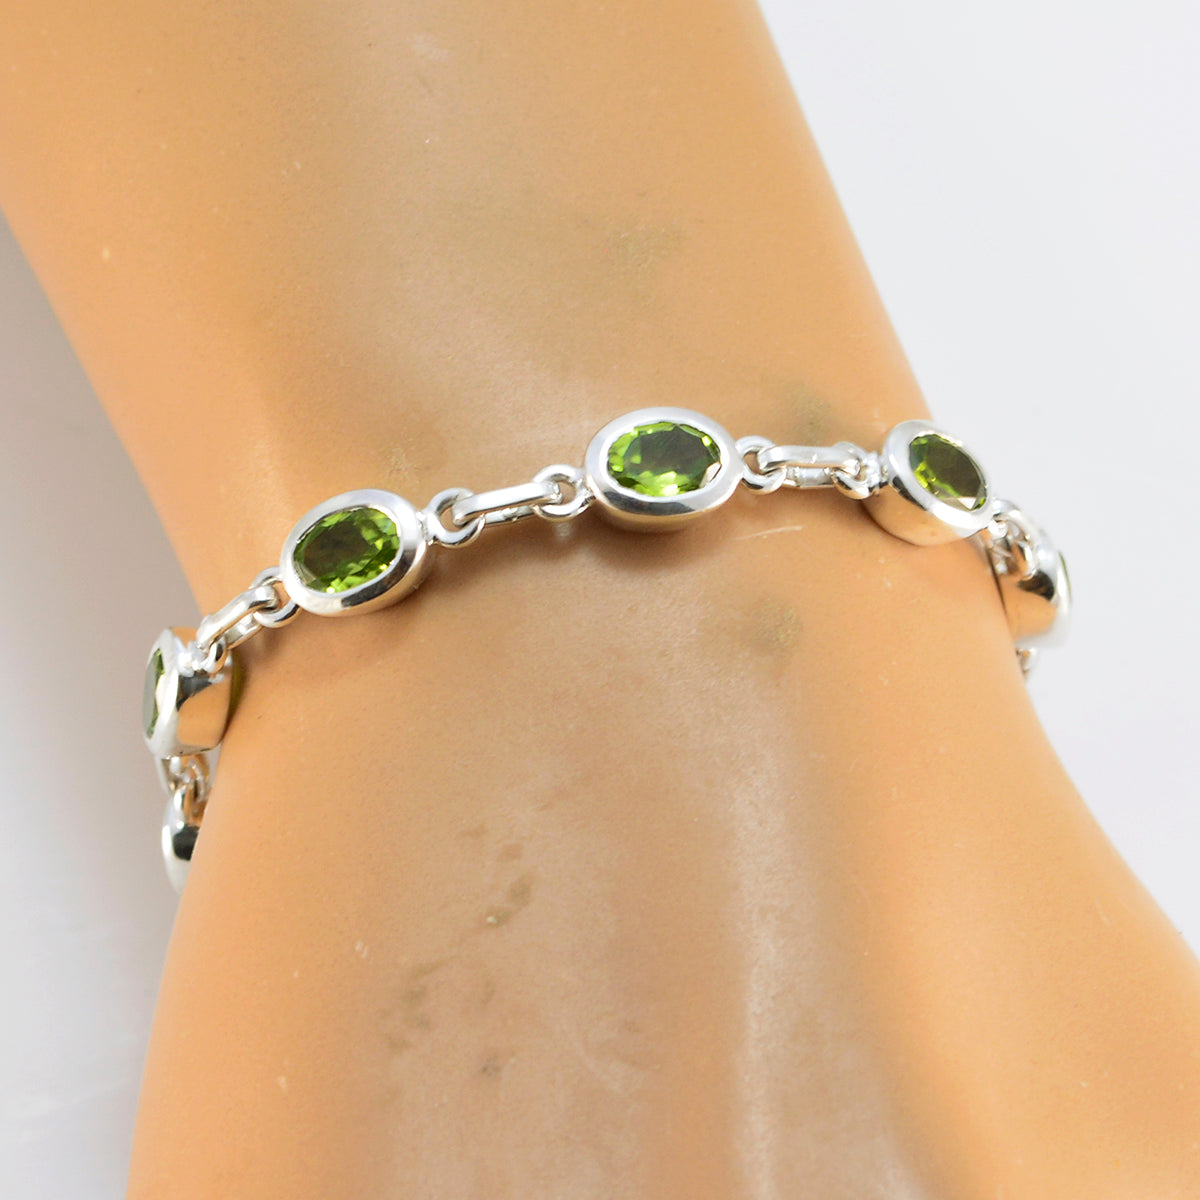 Riyo Genuine Gems Oval Faceted Green Peridot Silver Bracelets gift for independence day